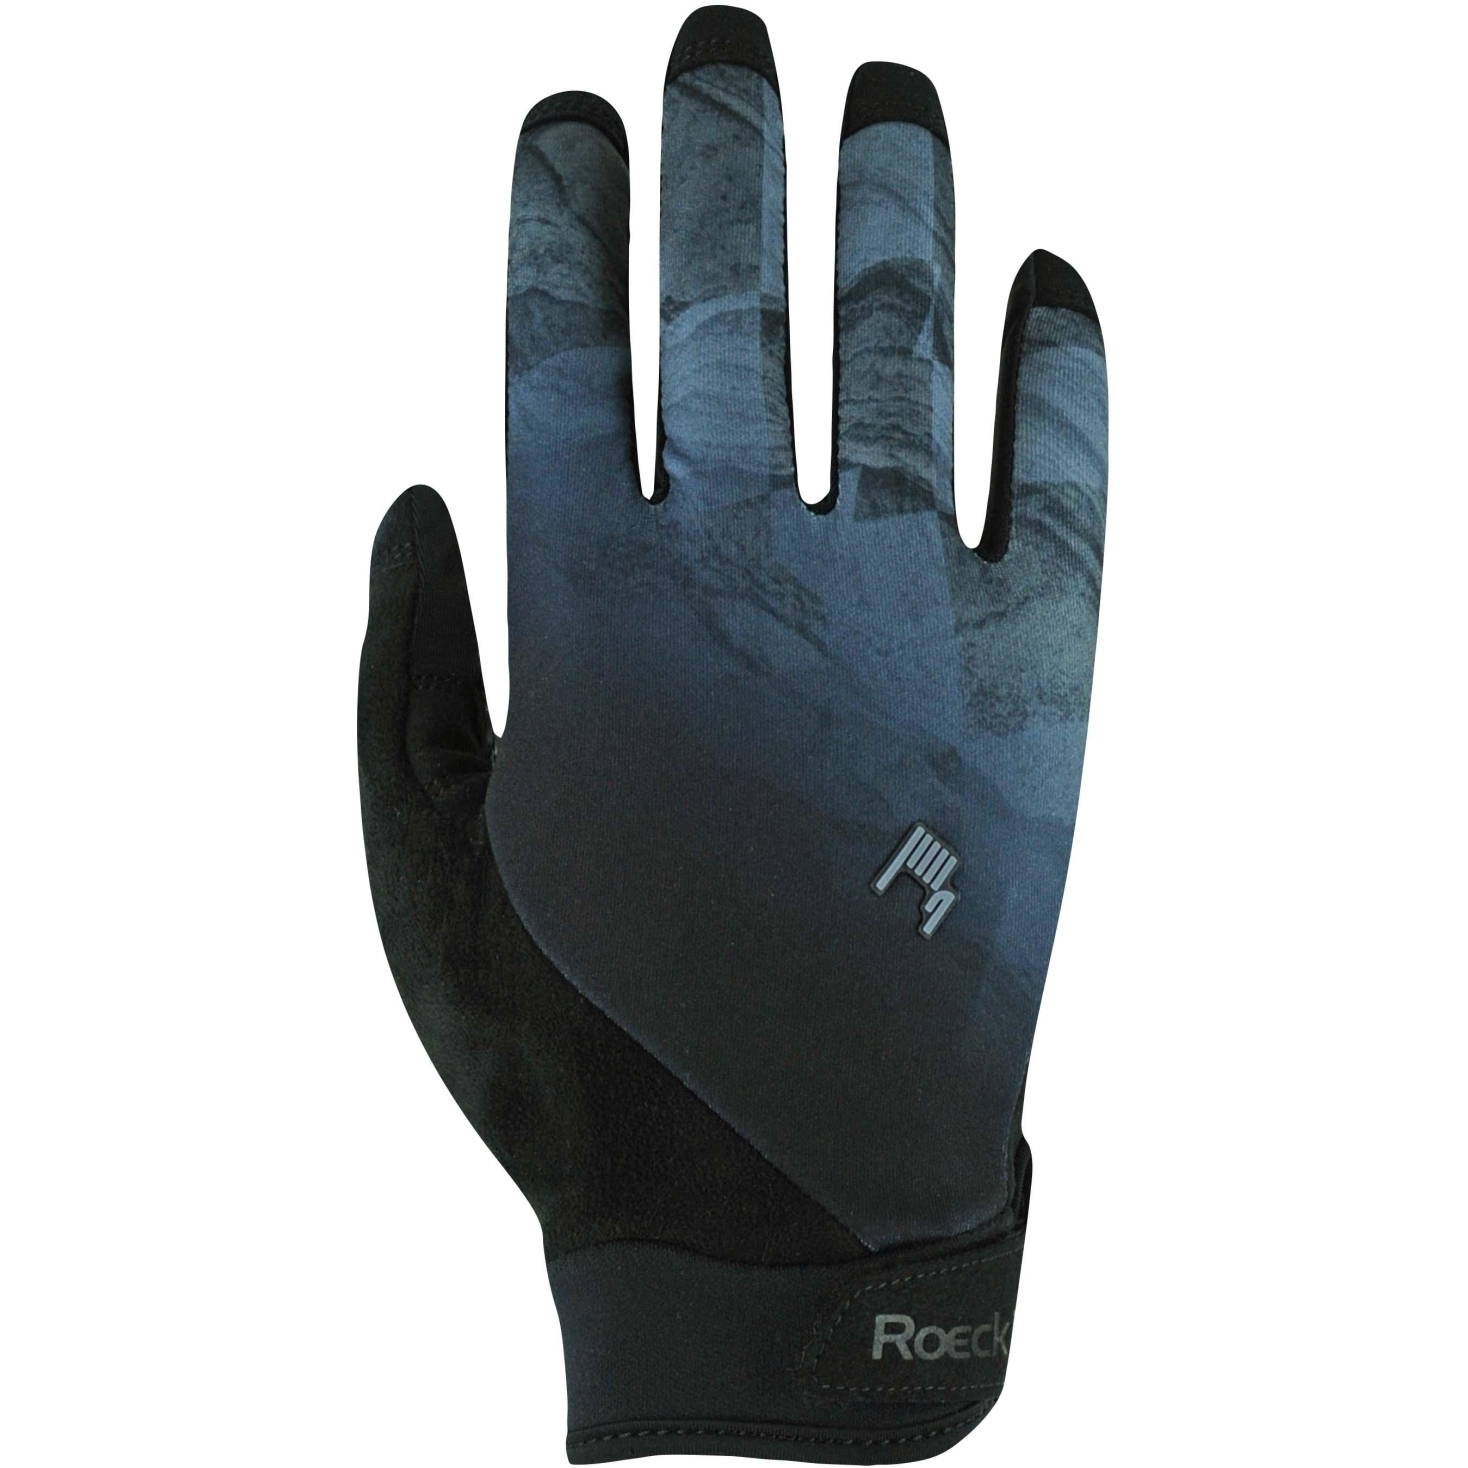 Picture of Roeckl Sports Montan Cycling Gloves - dark shadow 8600